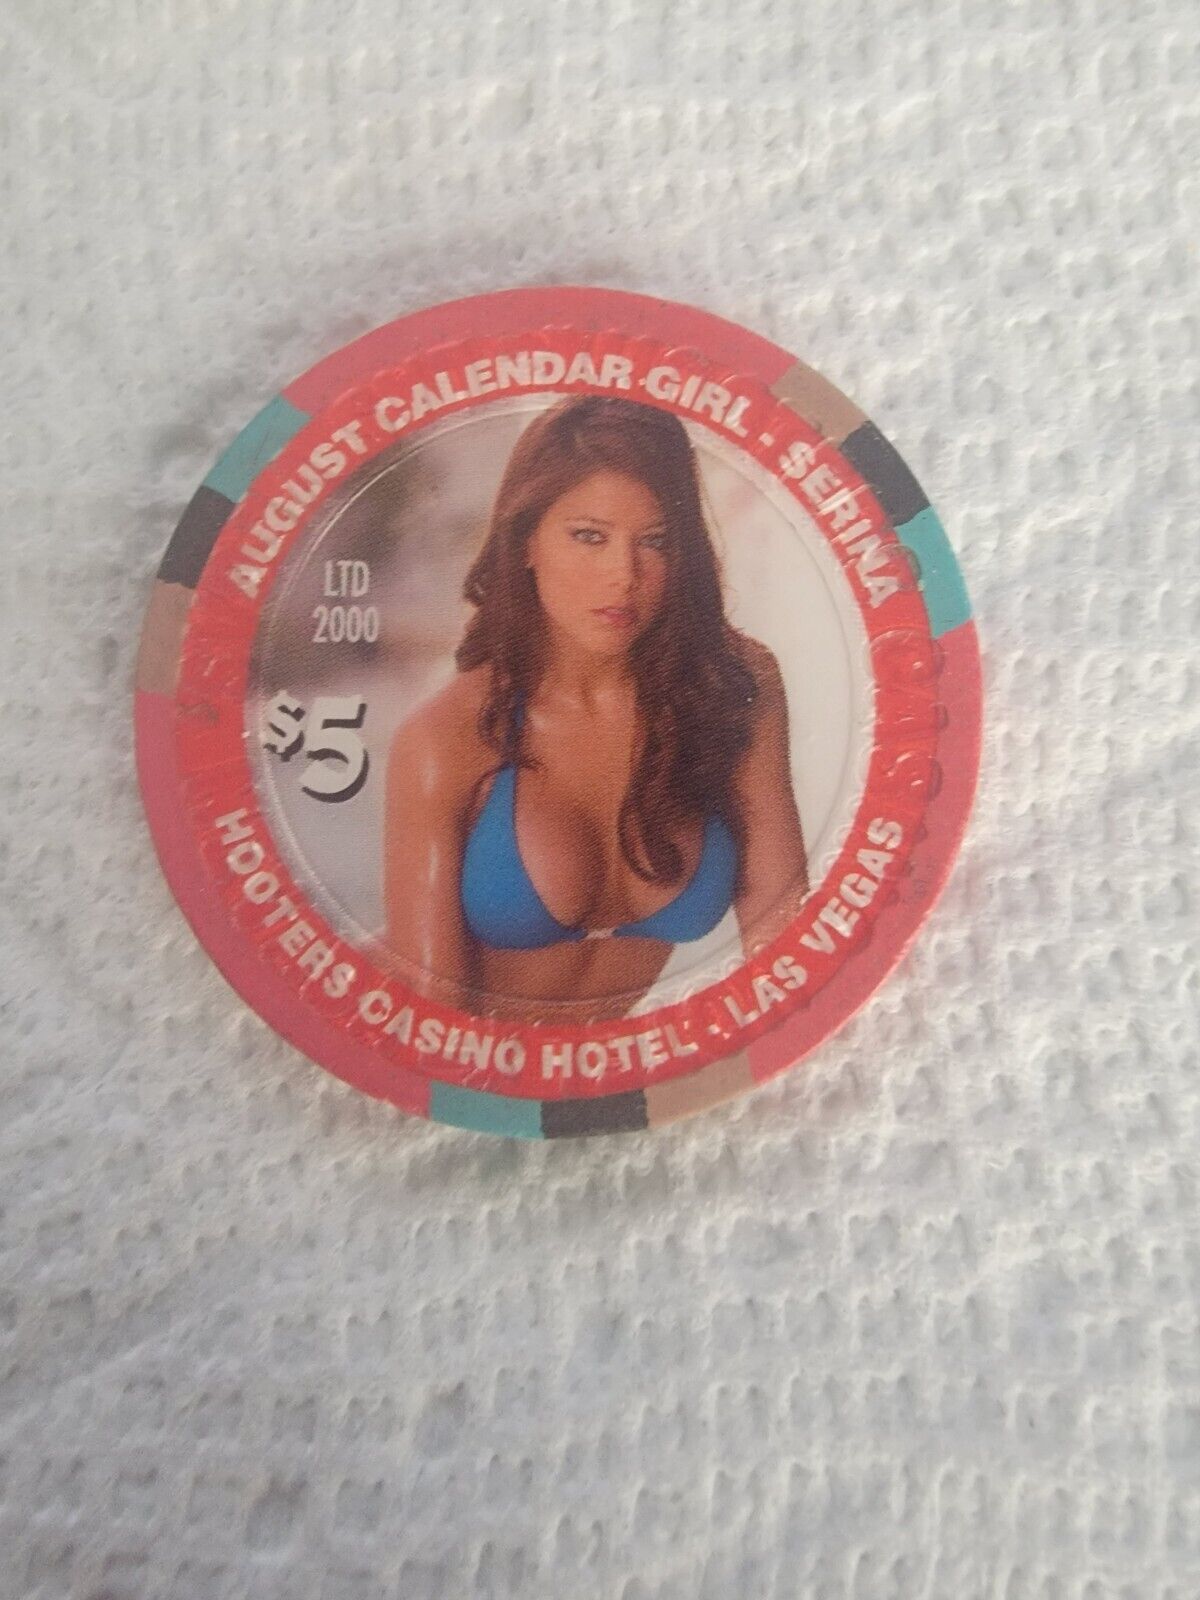 HOOTERS LAS VEGAS CHIP  $5 AUGUST  2000 CALENDER GIRL CASINO CHIP